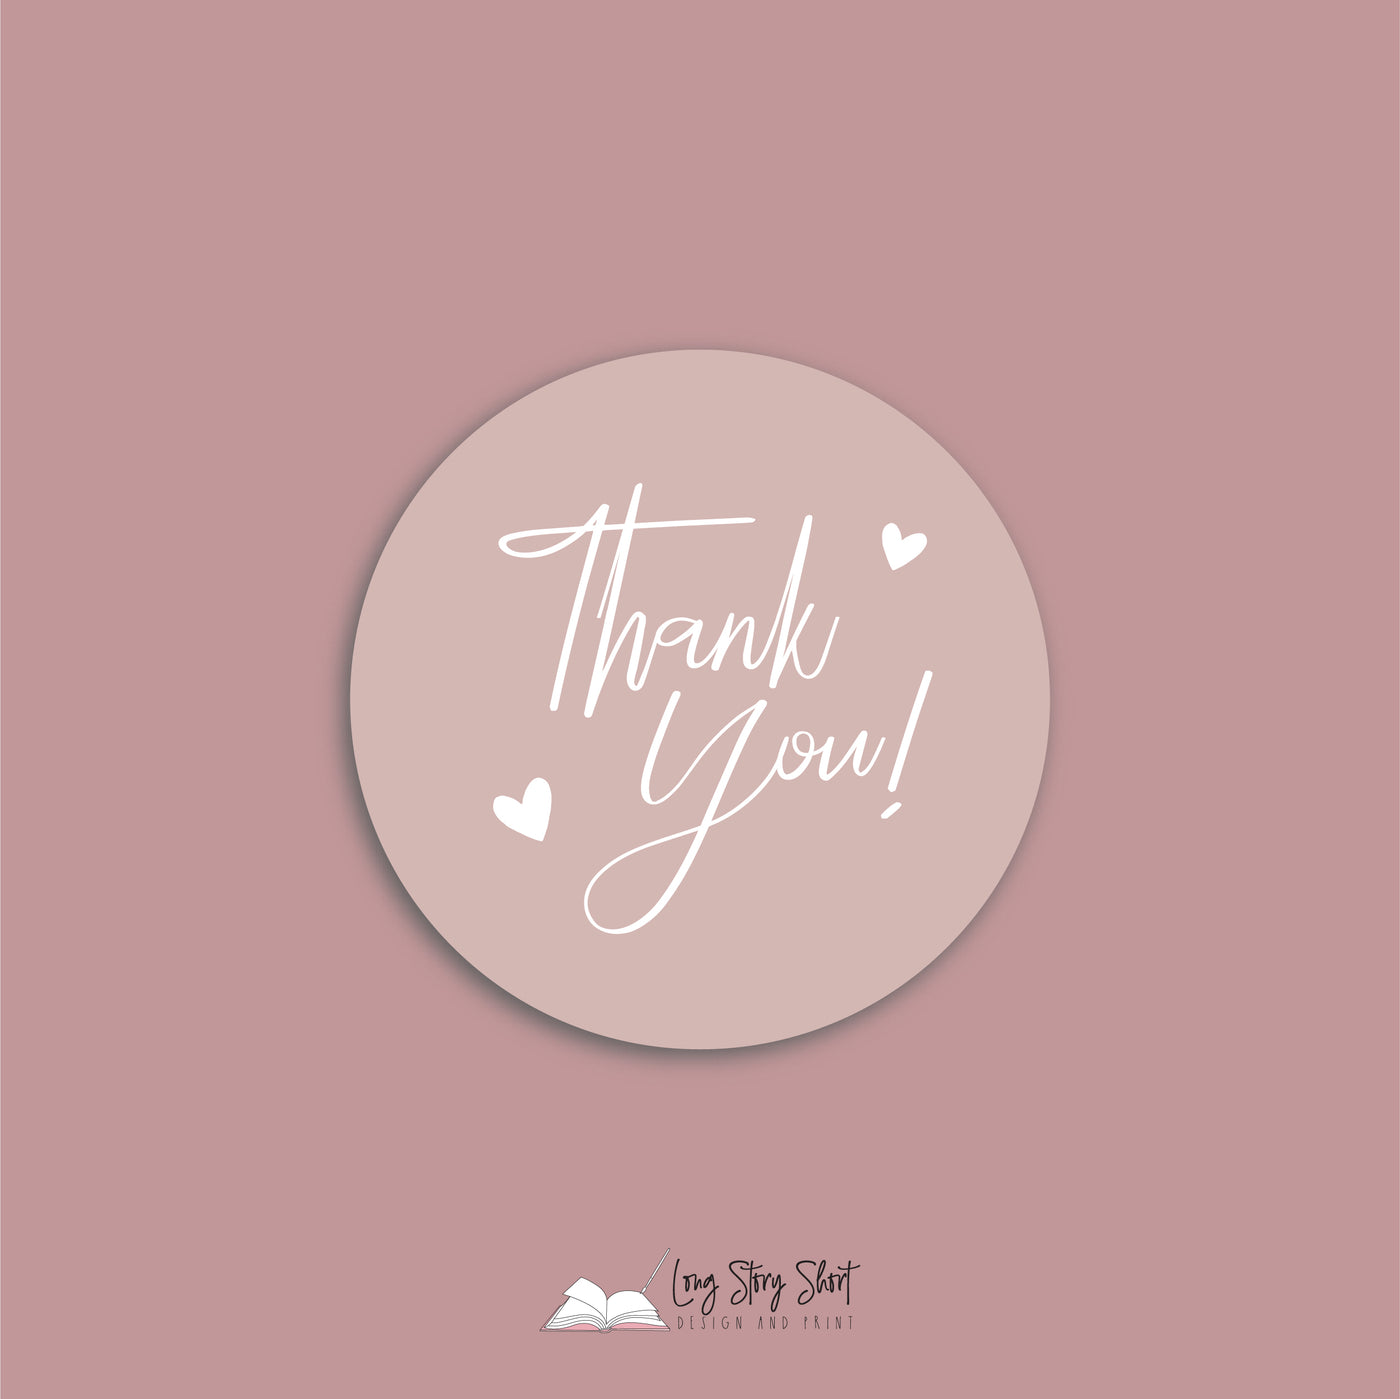 Thank you hearts Vinyl Label Pack